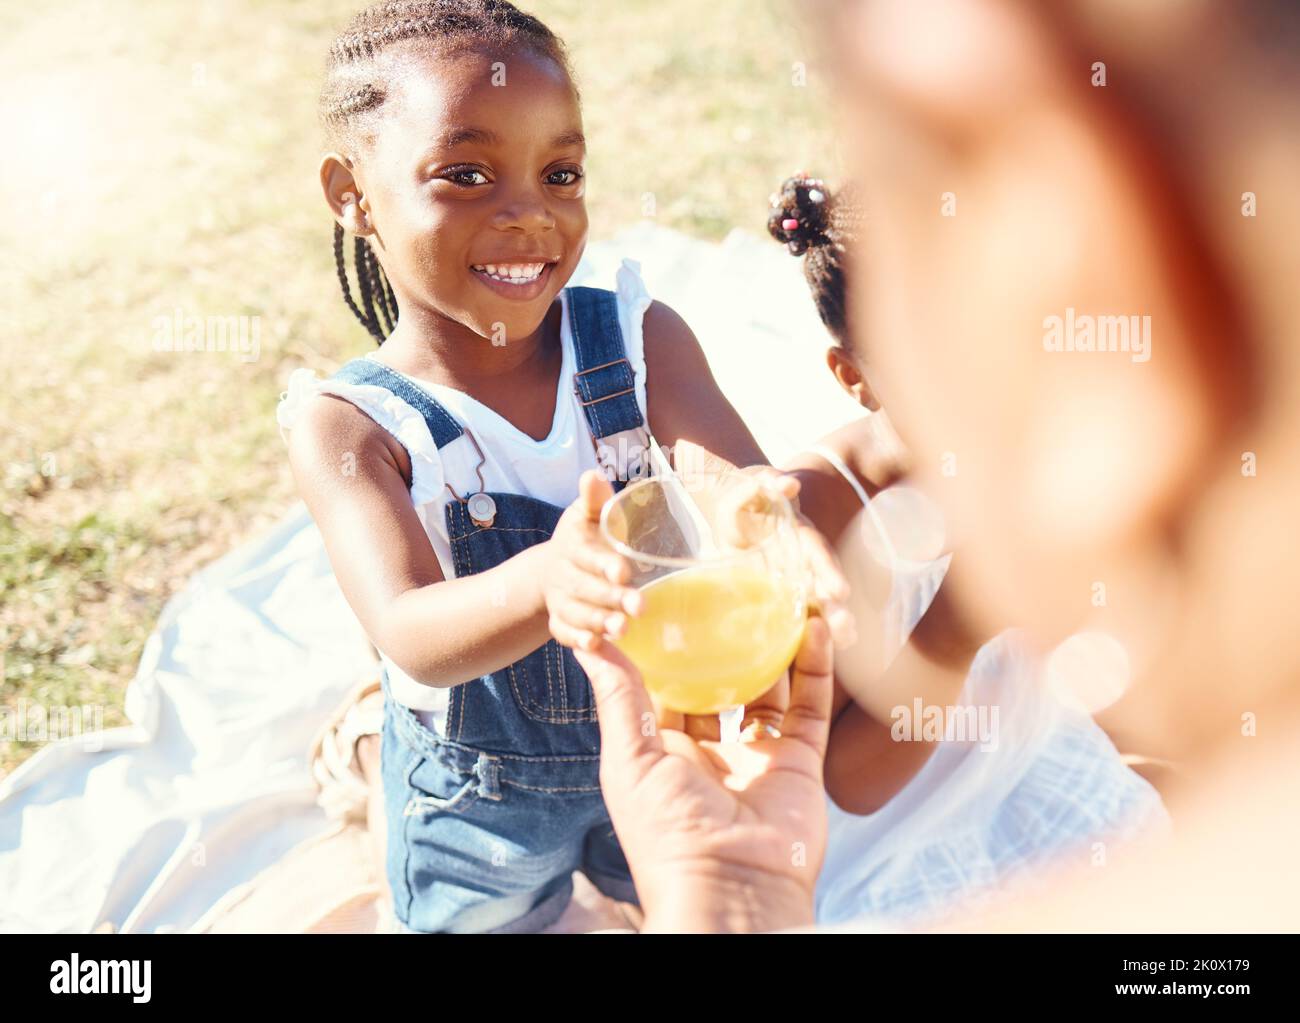 Happy girl, juice and smile in family picnic fun and joy in happiness on a warm summer day in nature. Black child smiling for fresh cold healthy Stock Photo